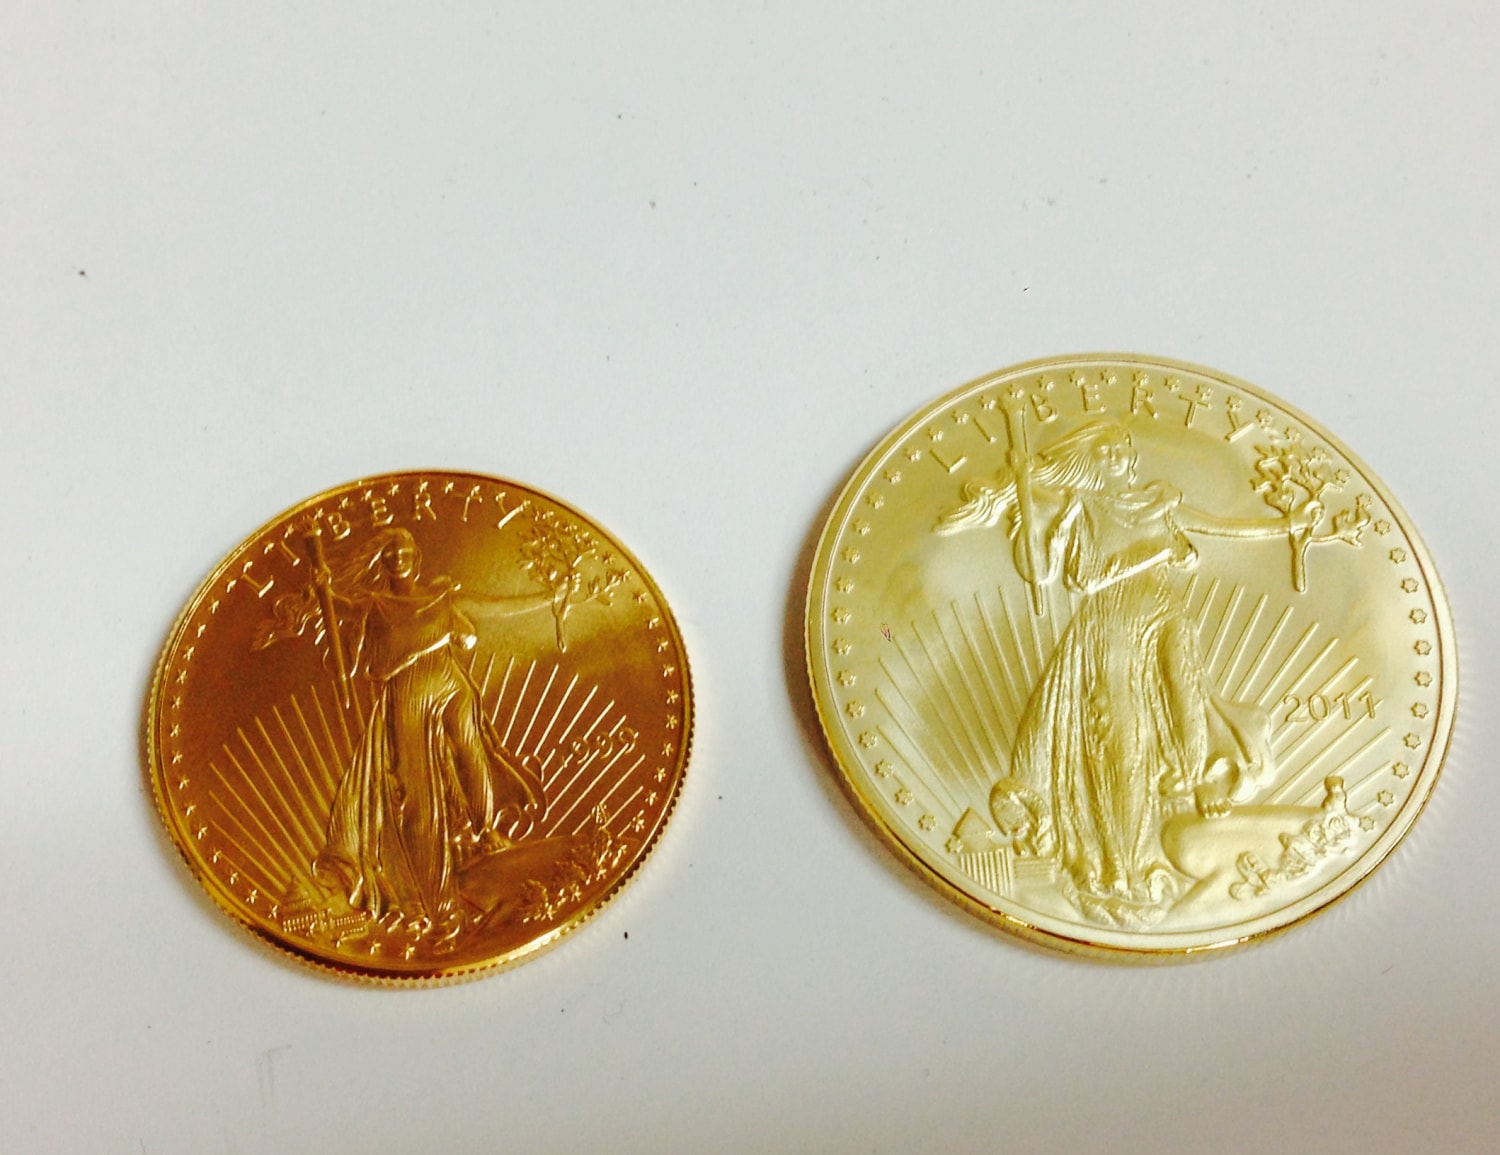 Buy and Sell Coins and Currency in Seattle Area